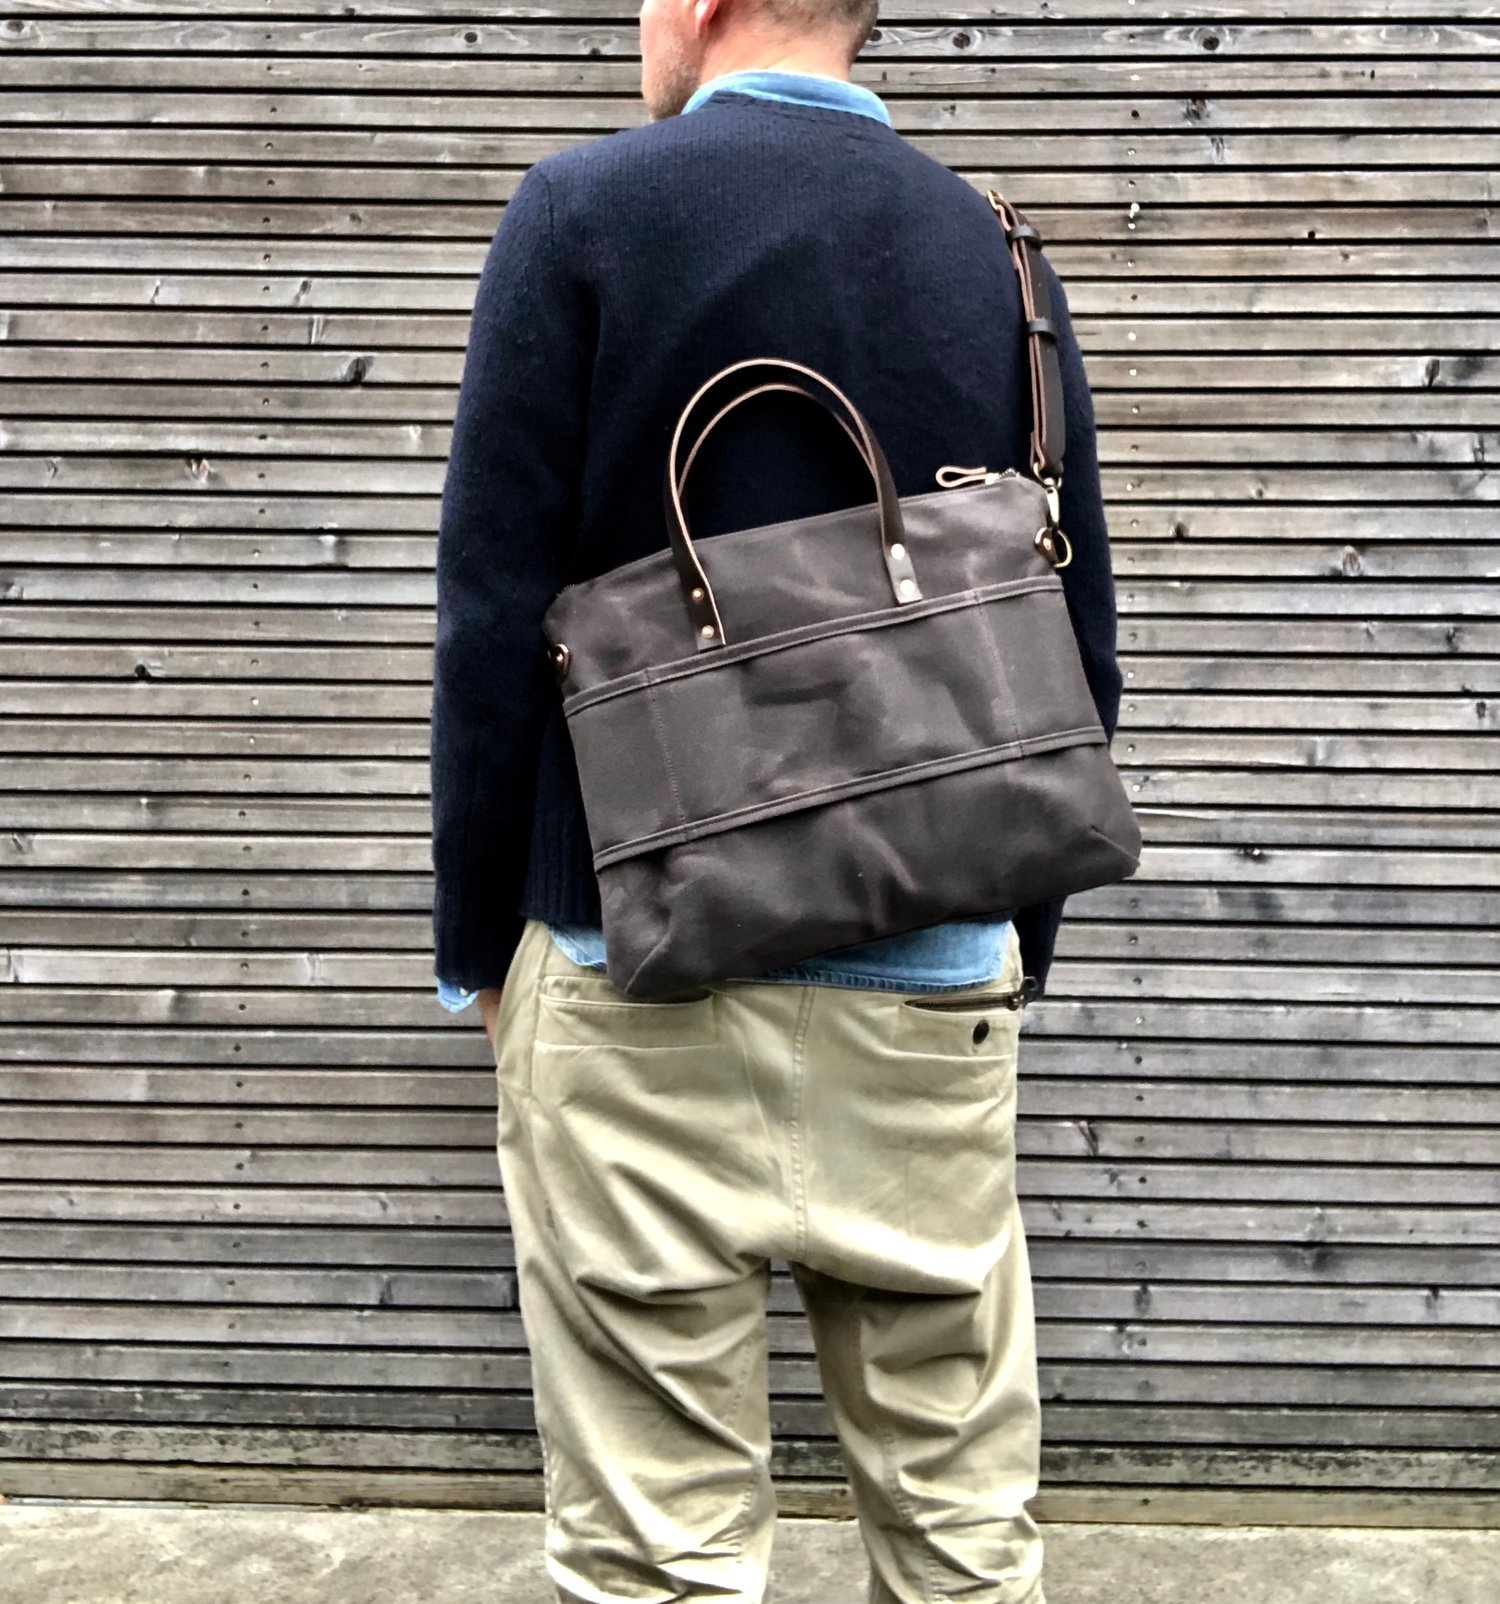 Image of Briefcase / Satchel in waxed canvas and leather COLLECTION UNISEX